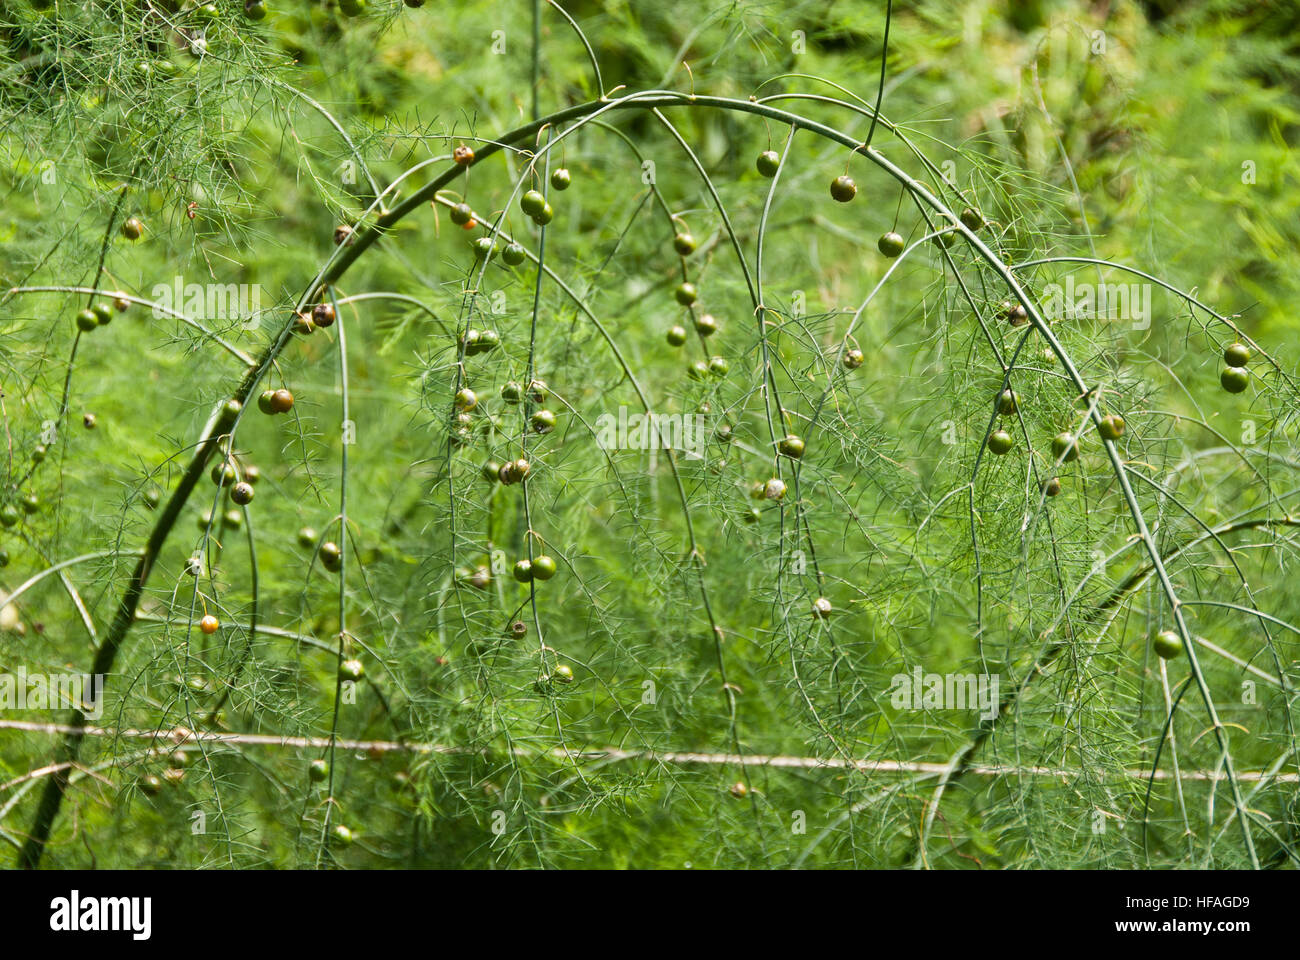 Asparagus vegetable growing going to seed heads, Asparagus officinalis, spring vegetable seedheads Stock Photo